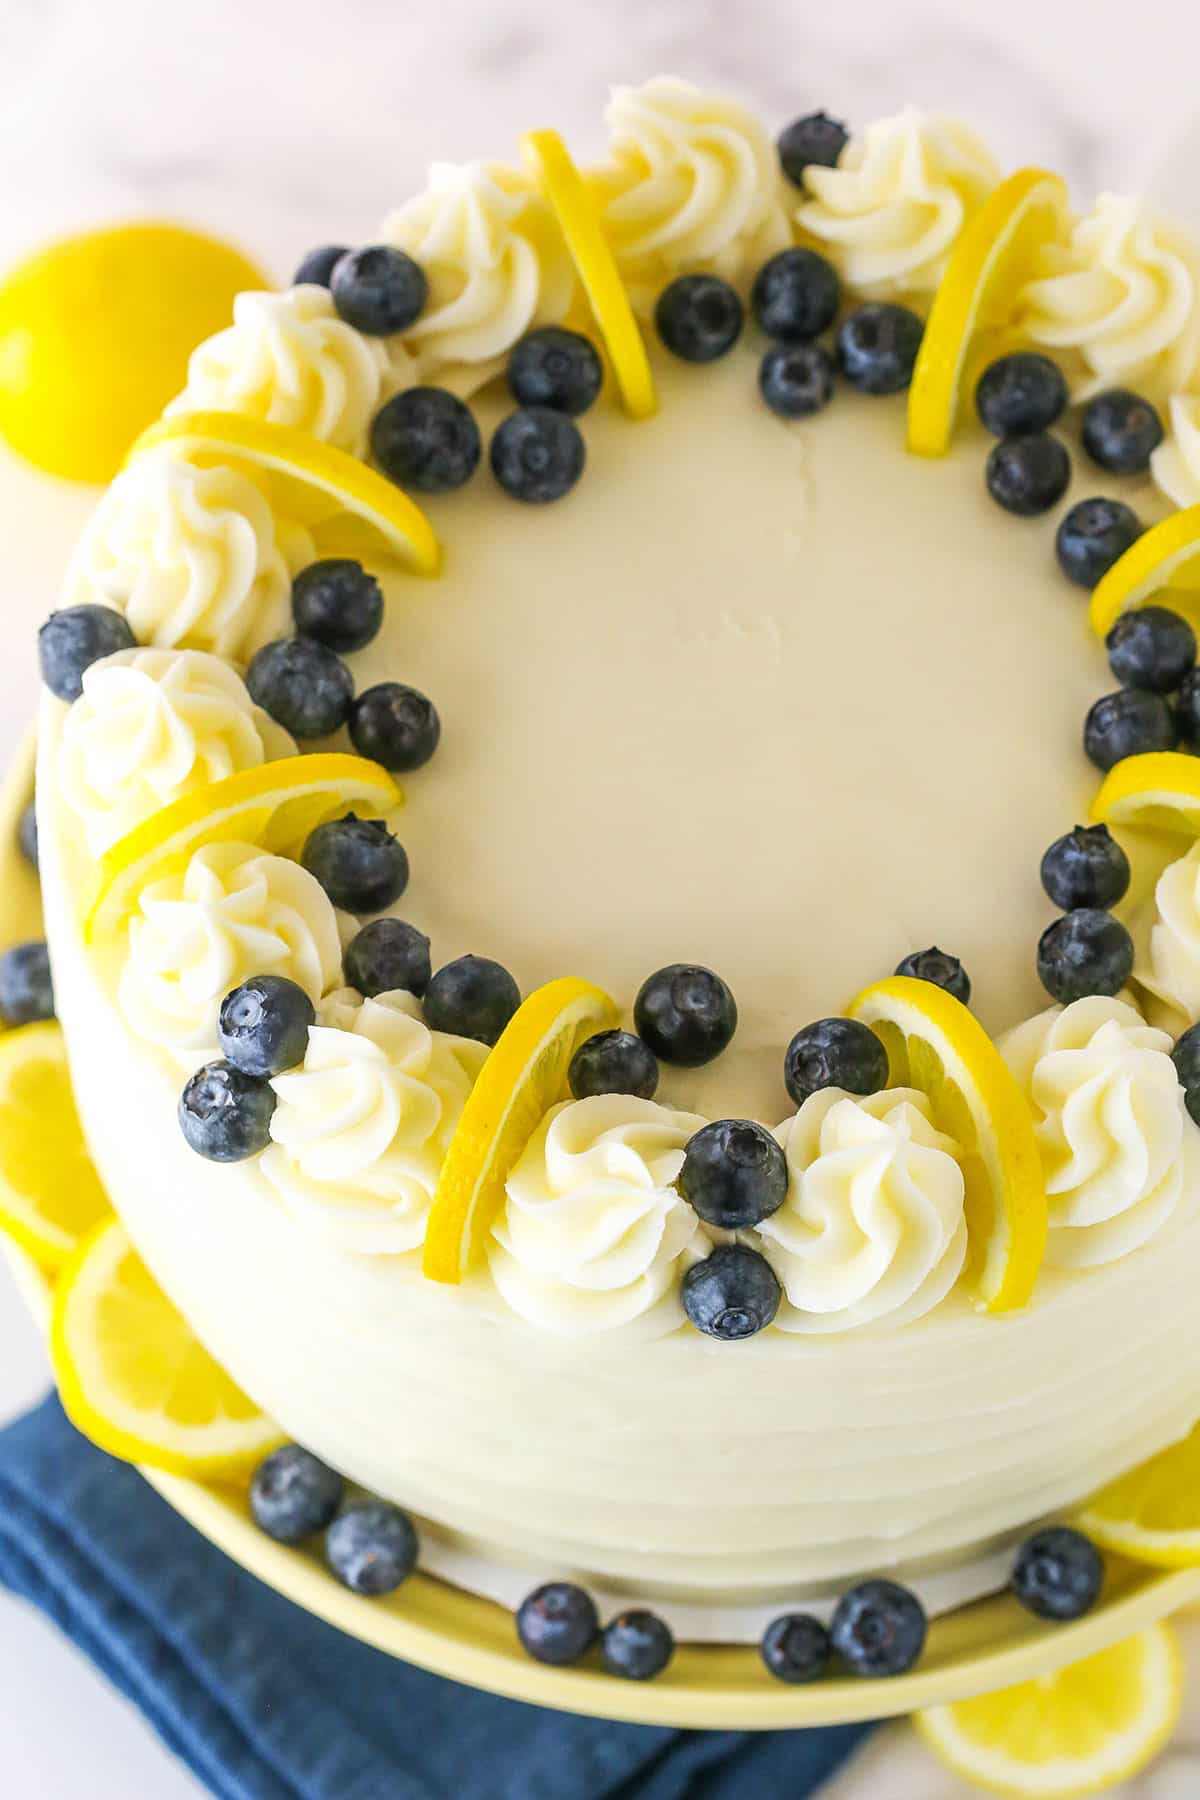 Overhead view of a full Lemon Blueberry Layer Cake with white swirls, blueberries and cut lemons on a yellow cake stand